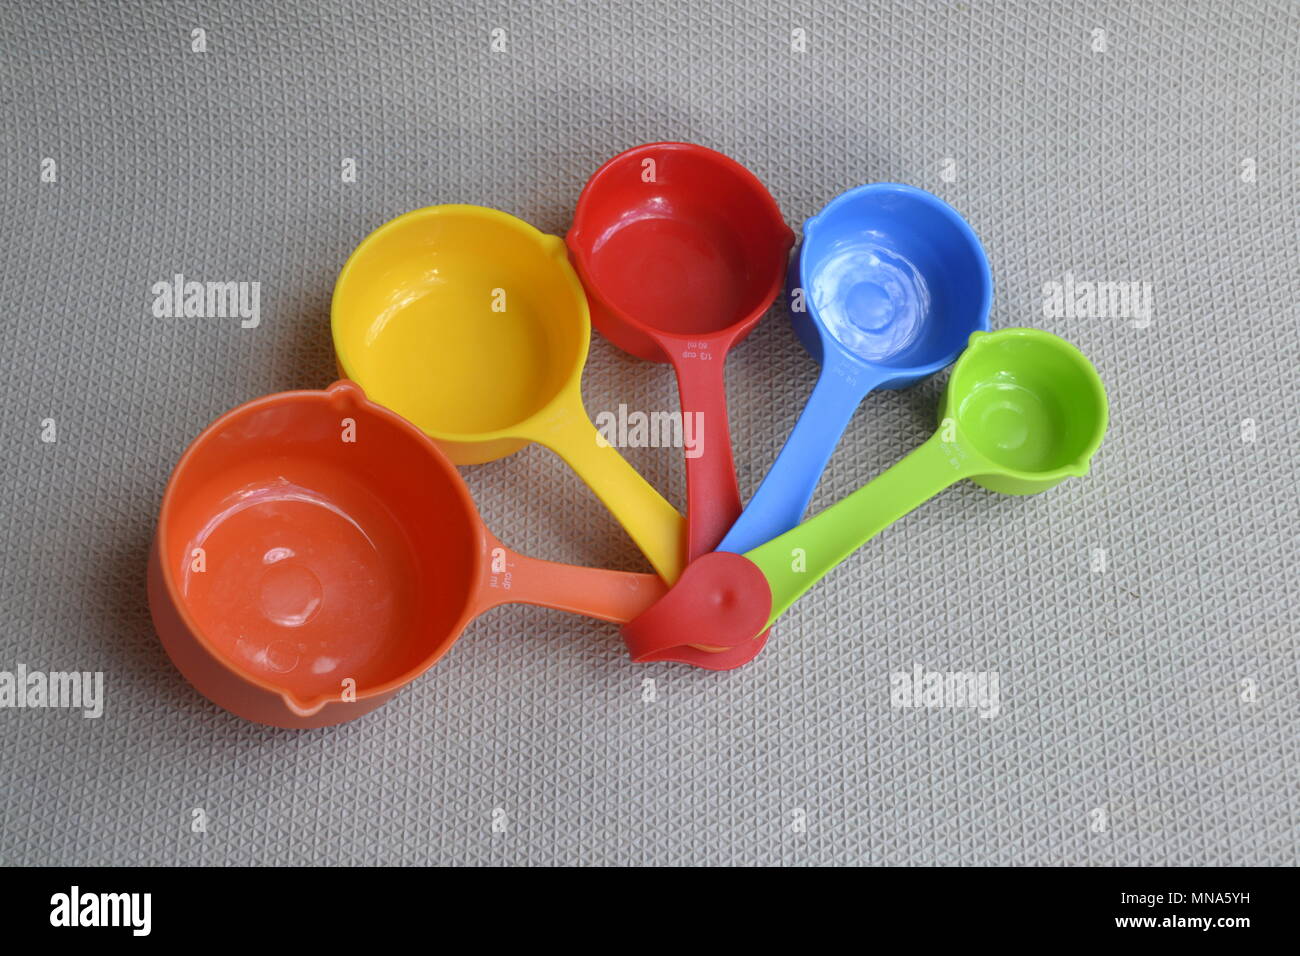 Nested Colorful rainbow kitchen measuring cups spoons colorful utensils Stock Photo